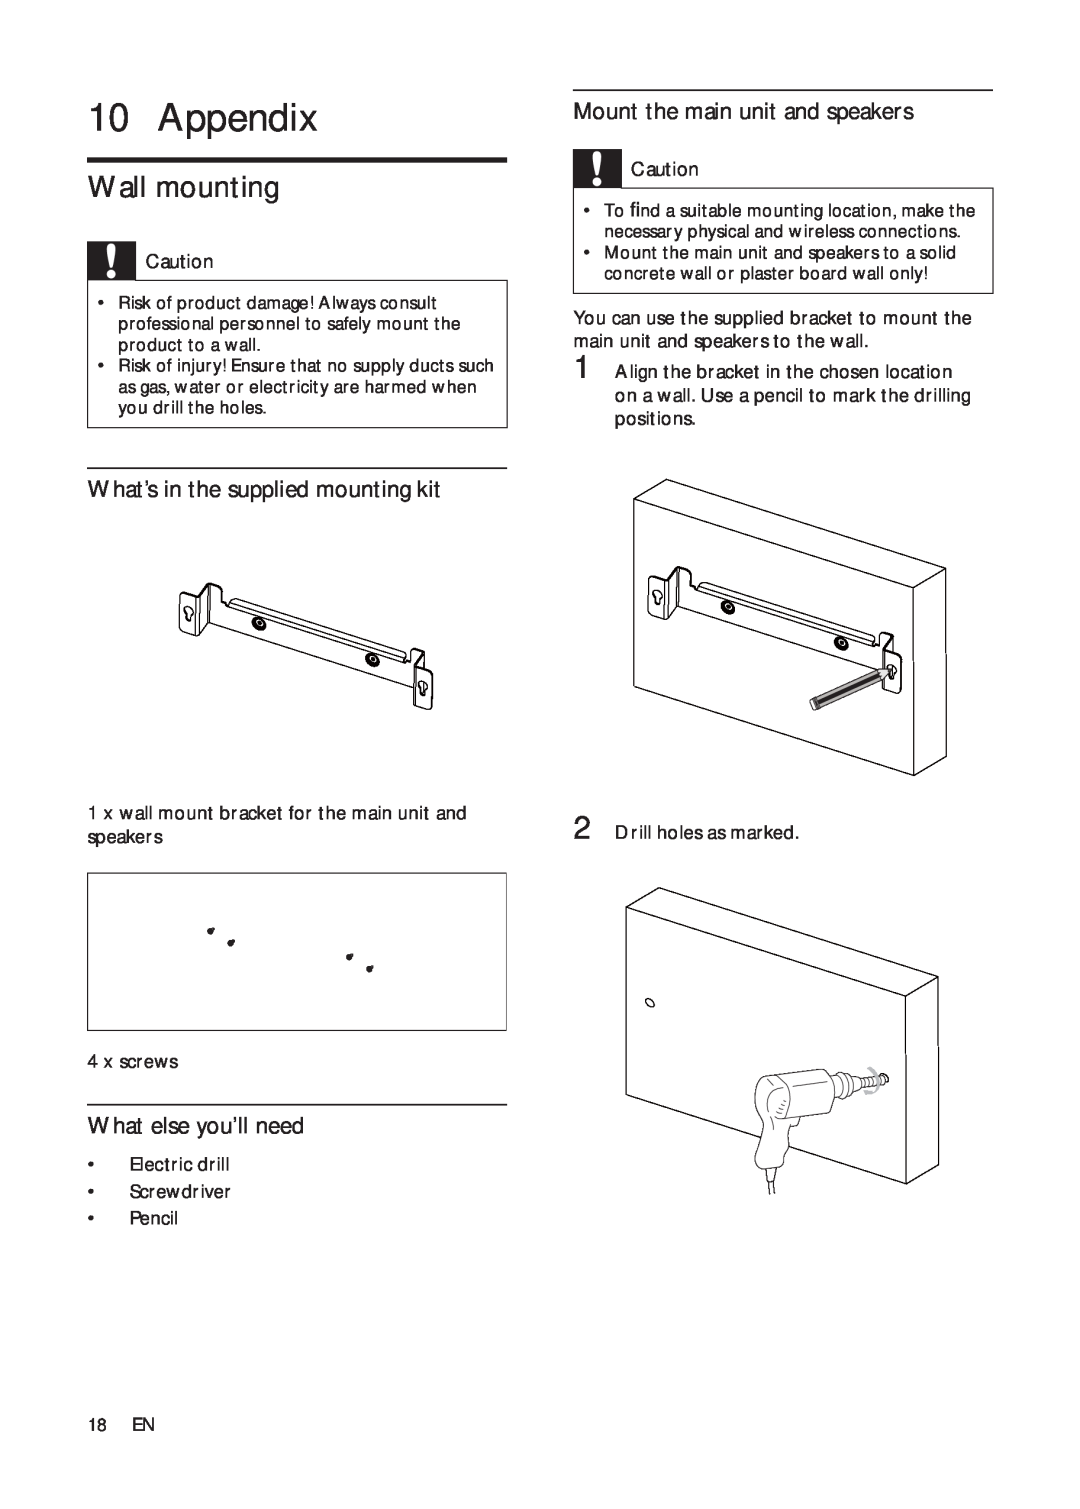 Philips HSB2313A/F7 Appendix, Wall mounting, Mount the main unit and speakers, What’s in the supplied mounting kit 